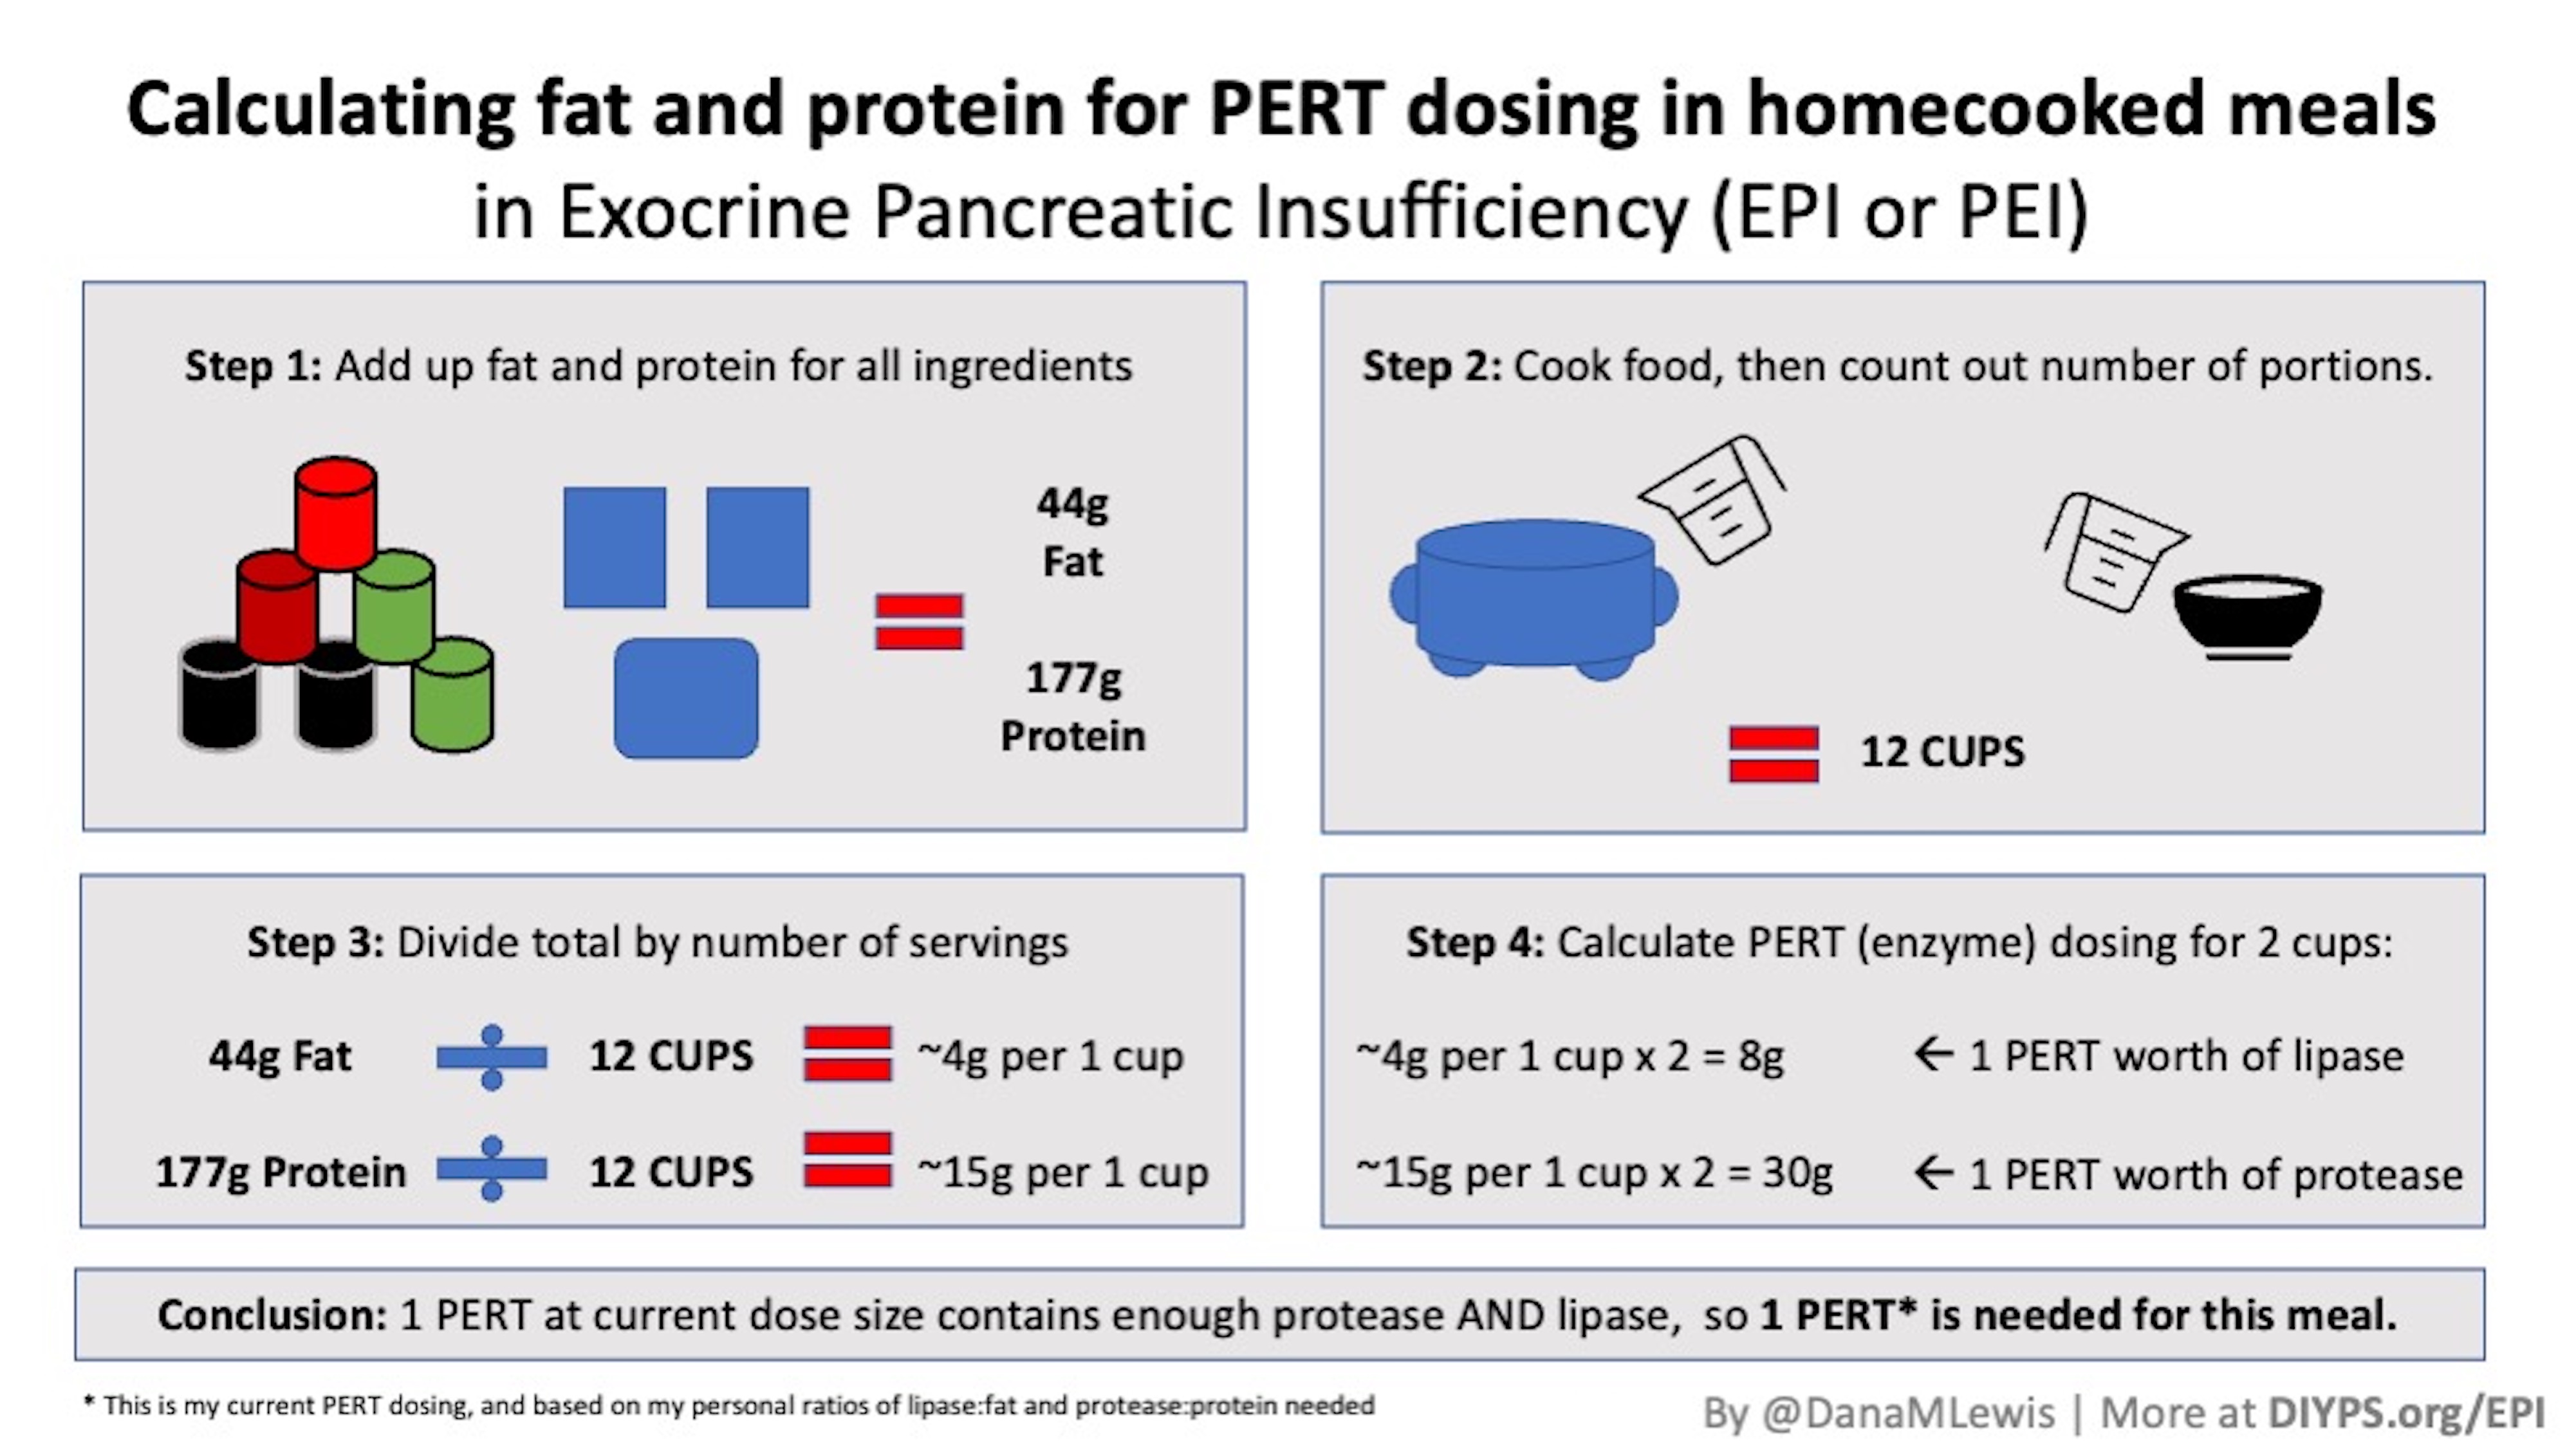 An overview of the process of adding up fat and protein for all ingredients in a recipe; cooking and counting out the number of portions, then dividing the fat and protein totals by the number of portions (I use cups) to determine how many grams of each per serving and determine how much PERT to dose. 